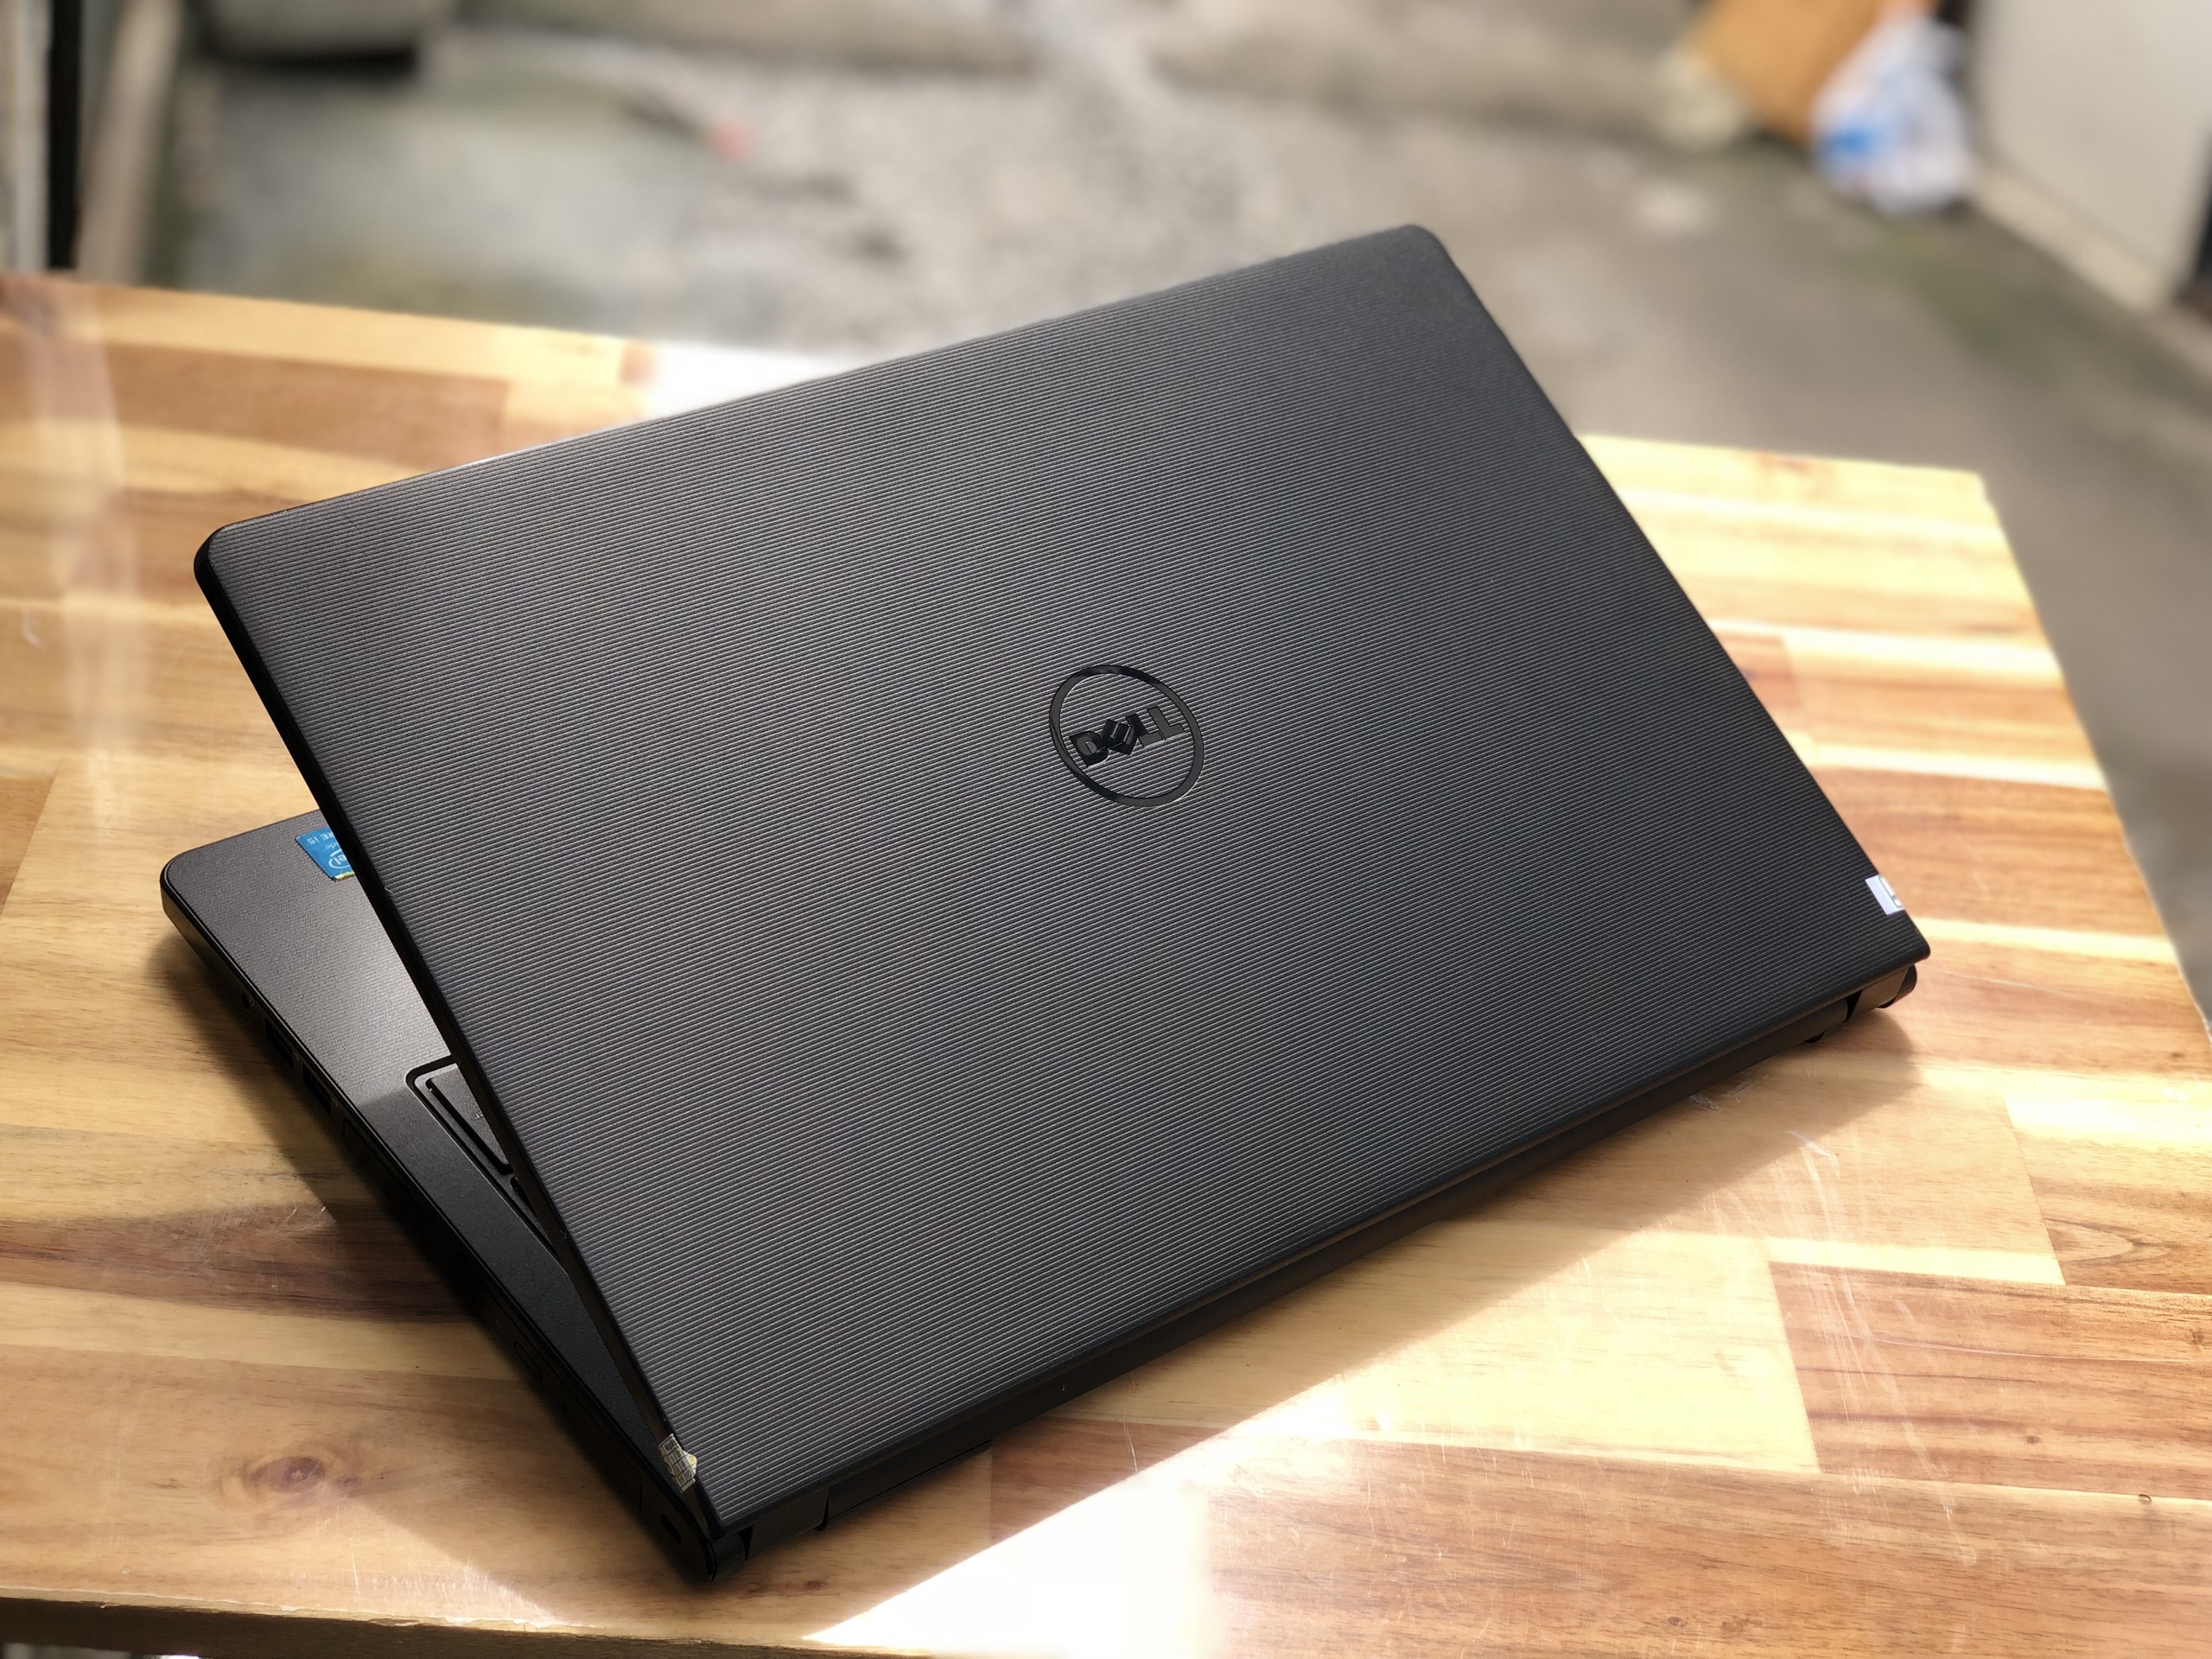 Laptop Dell Vostro 3558/ i5 5250U/ 4G/ SSD128/ 15in/ Win 10/ Giá rẻ